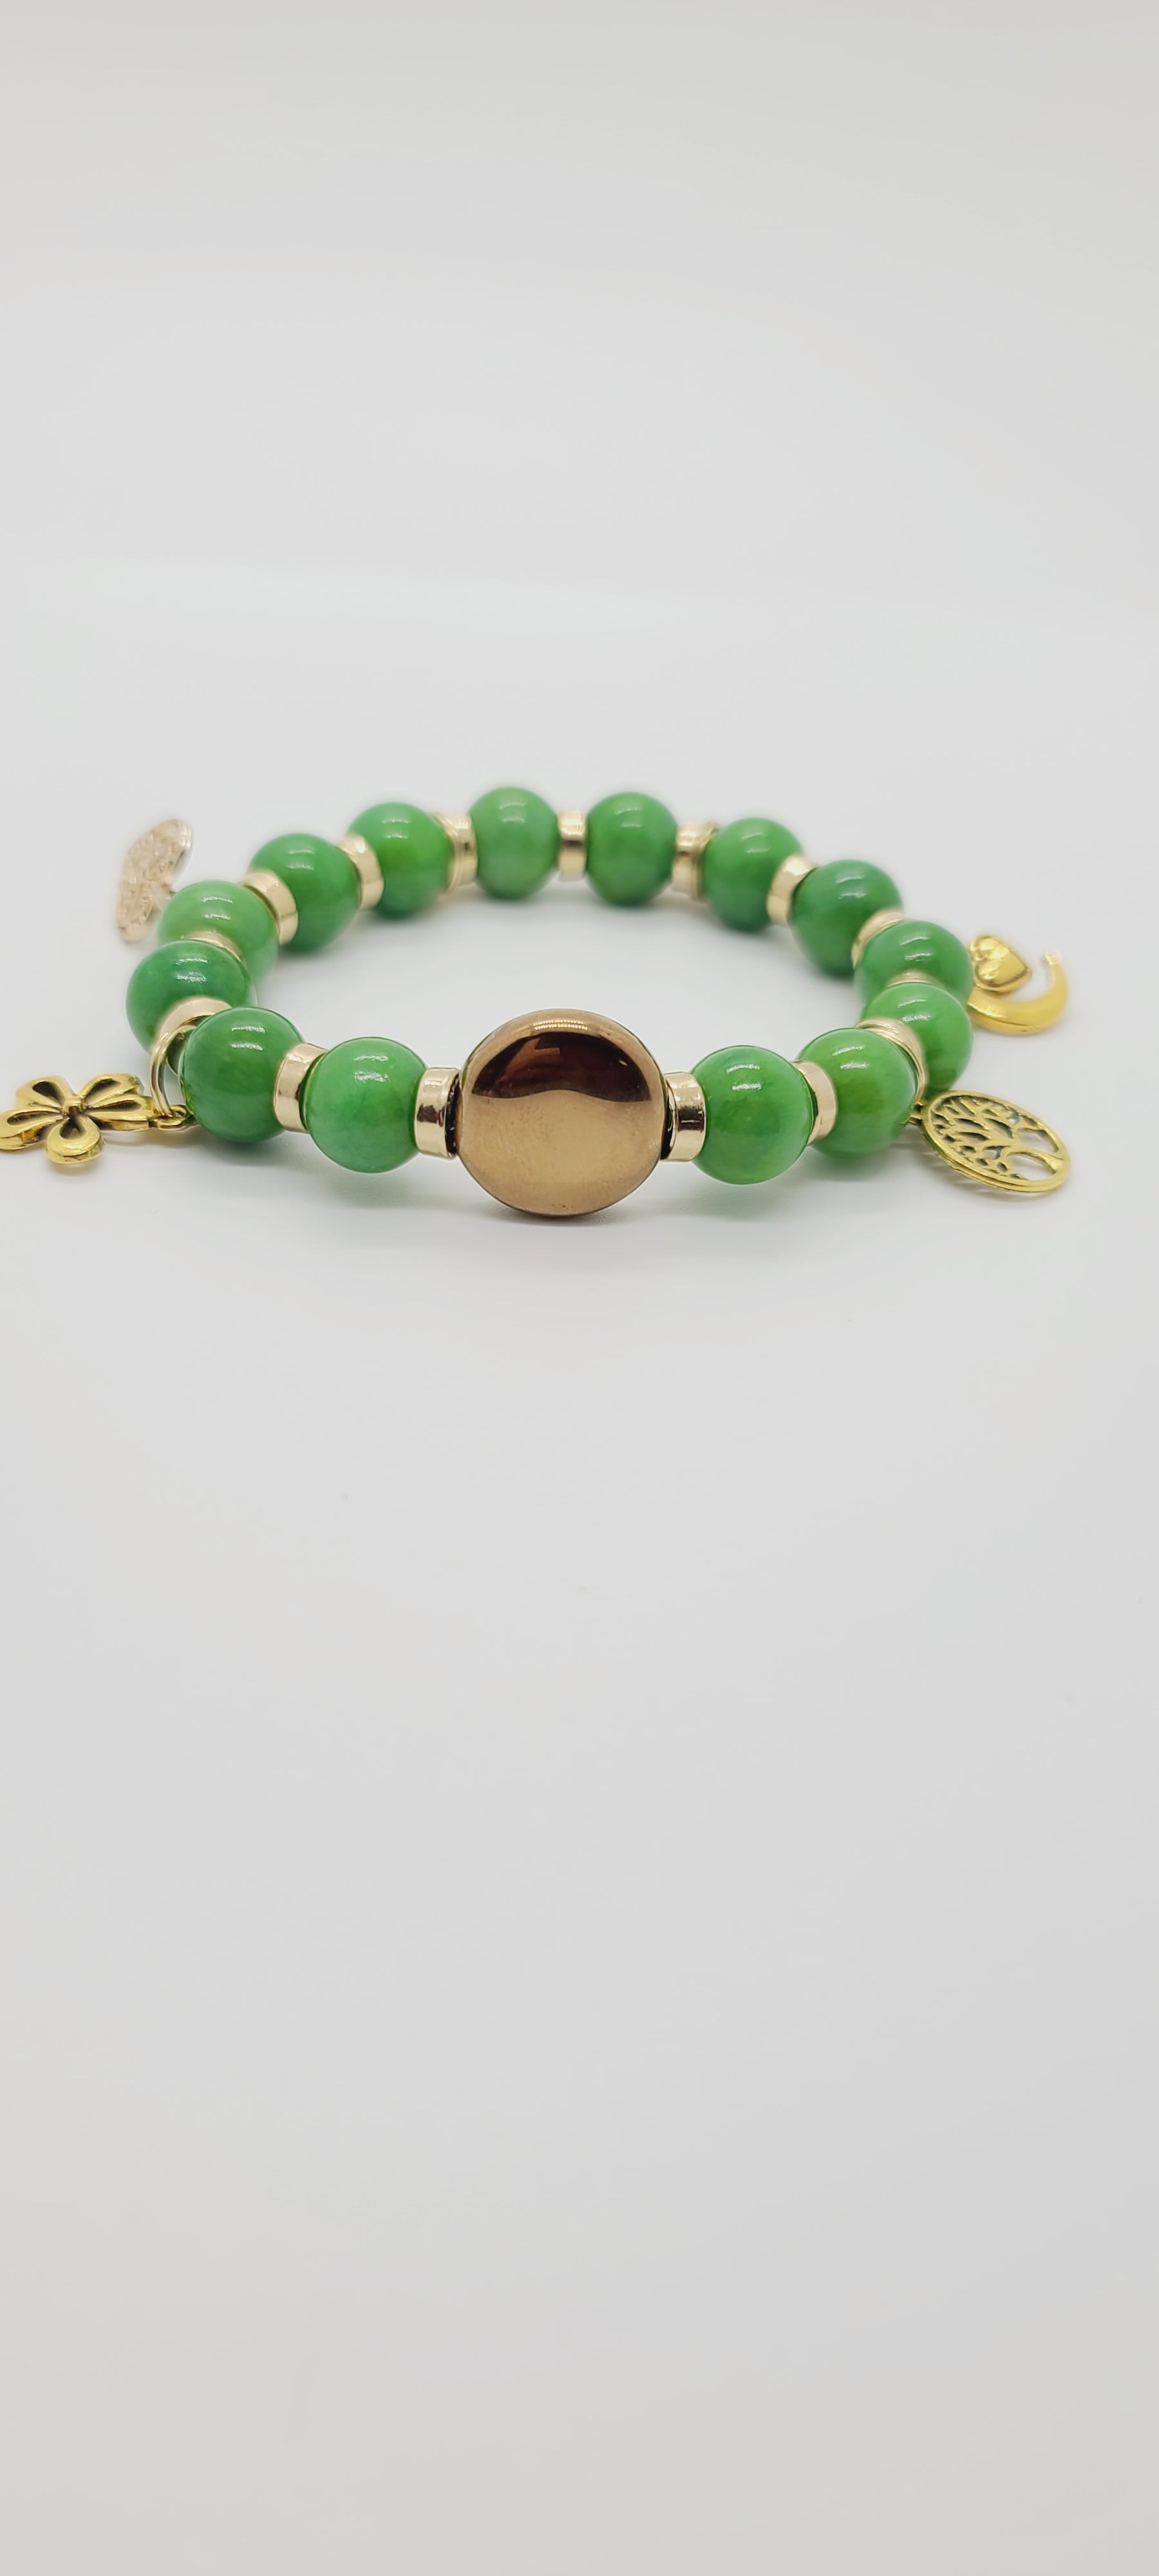 Length: 7.75 inches | Weight: 2 ounces  Distinctly You! This bracelet is made with 12mm rich green ceramic Beads, 16mm gold glass disc centerpiece, with gold charms and spacers.